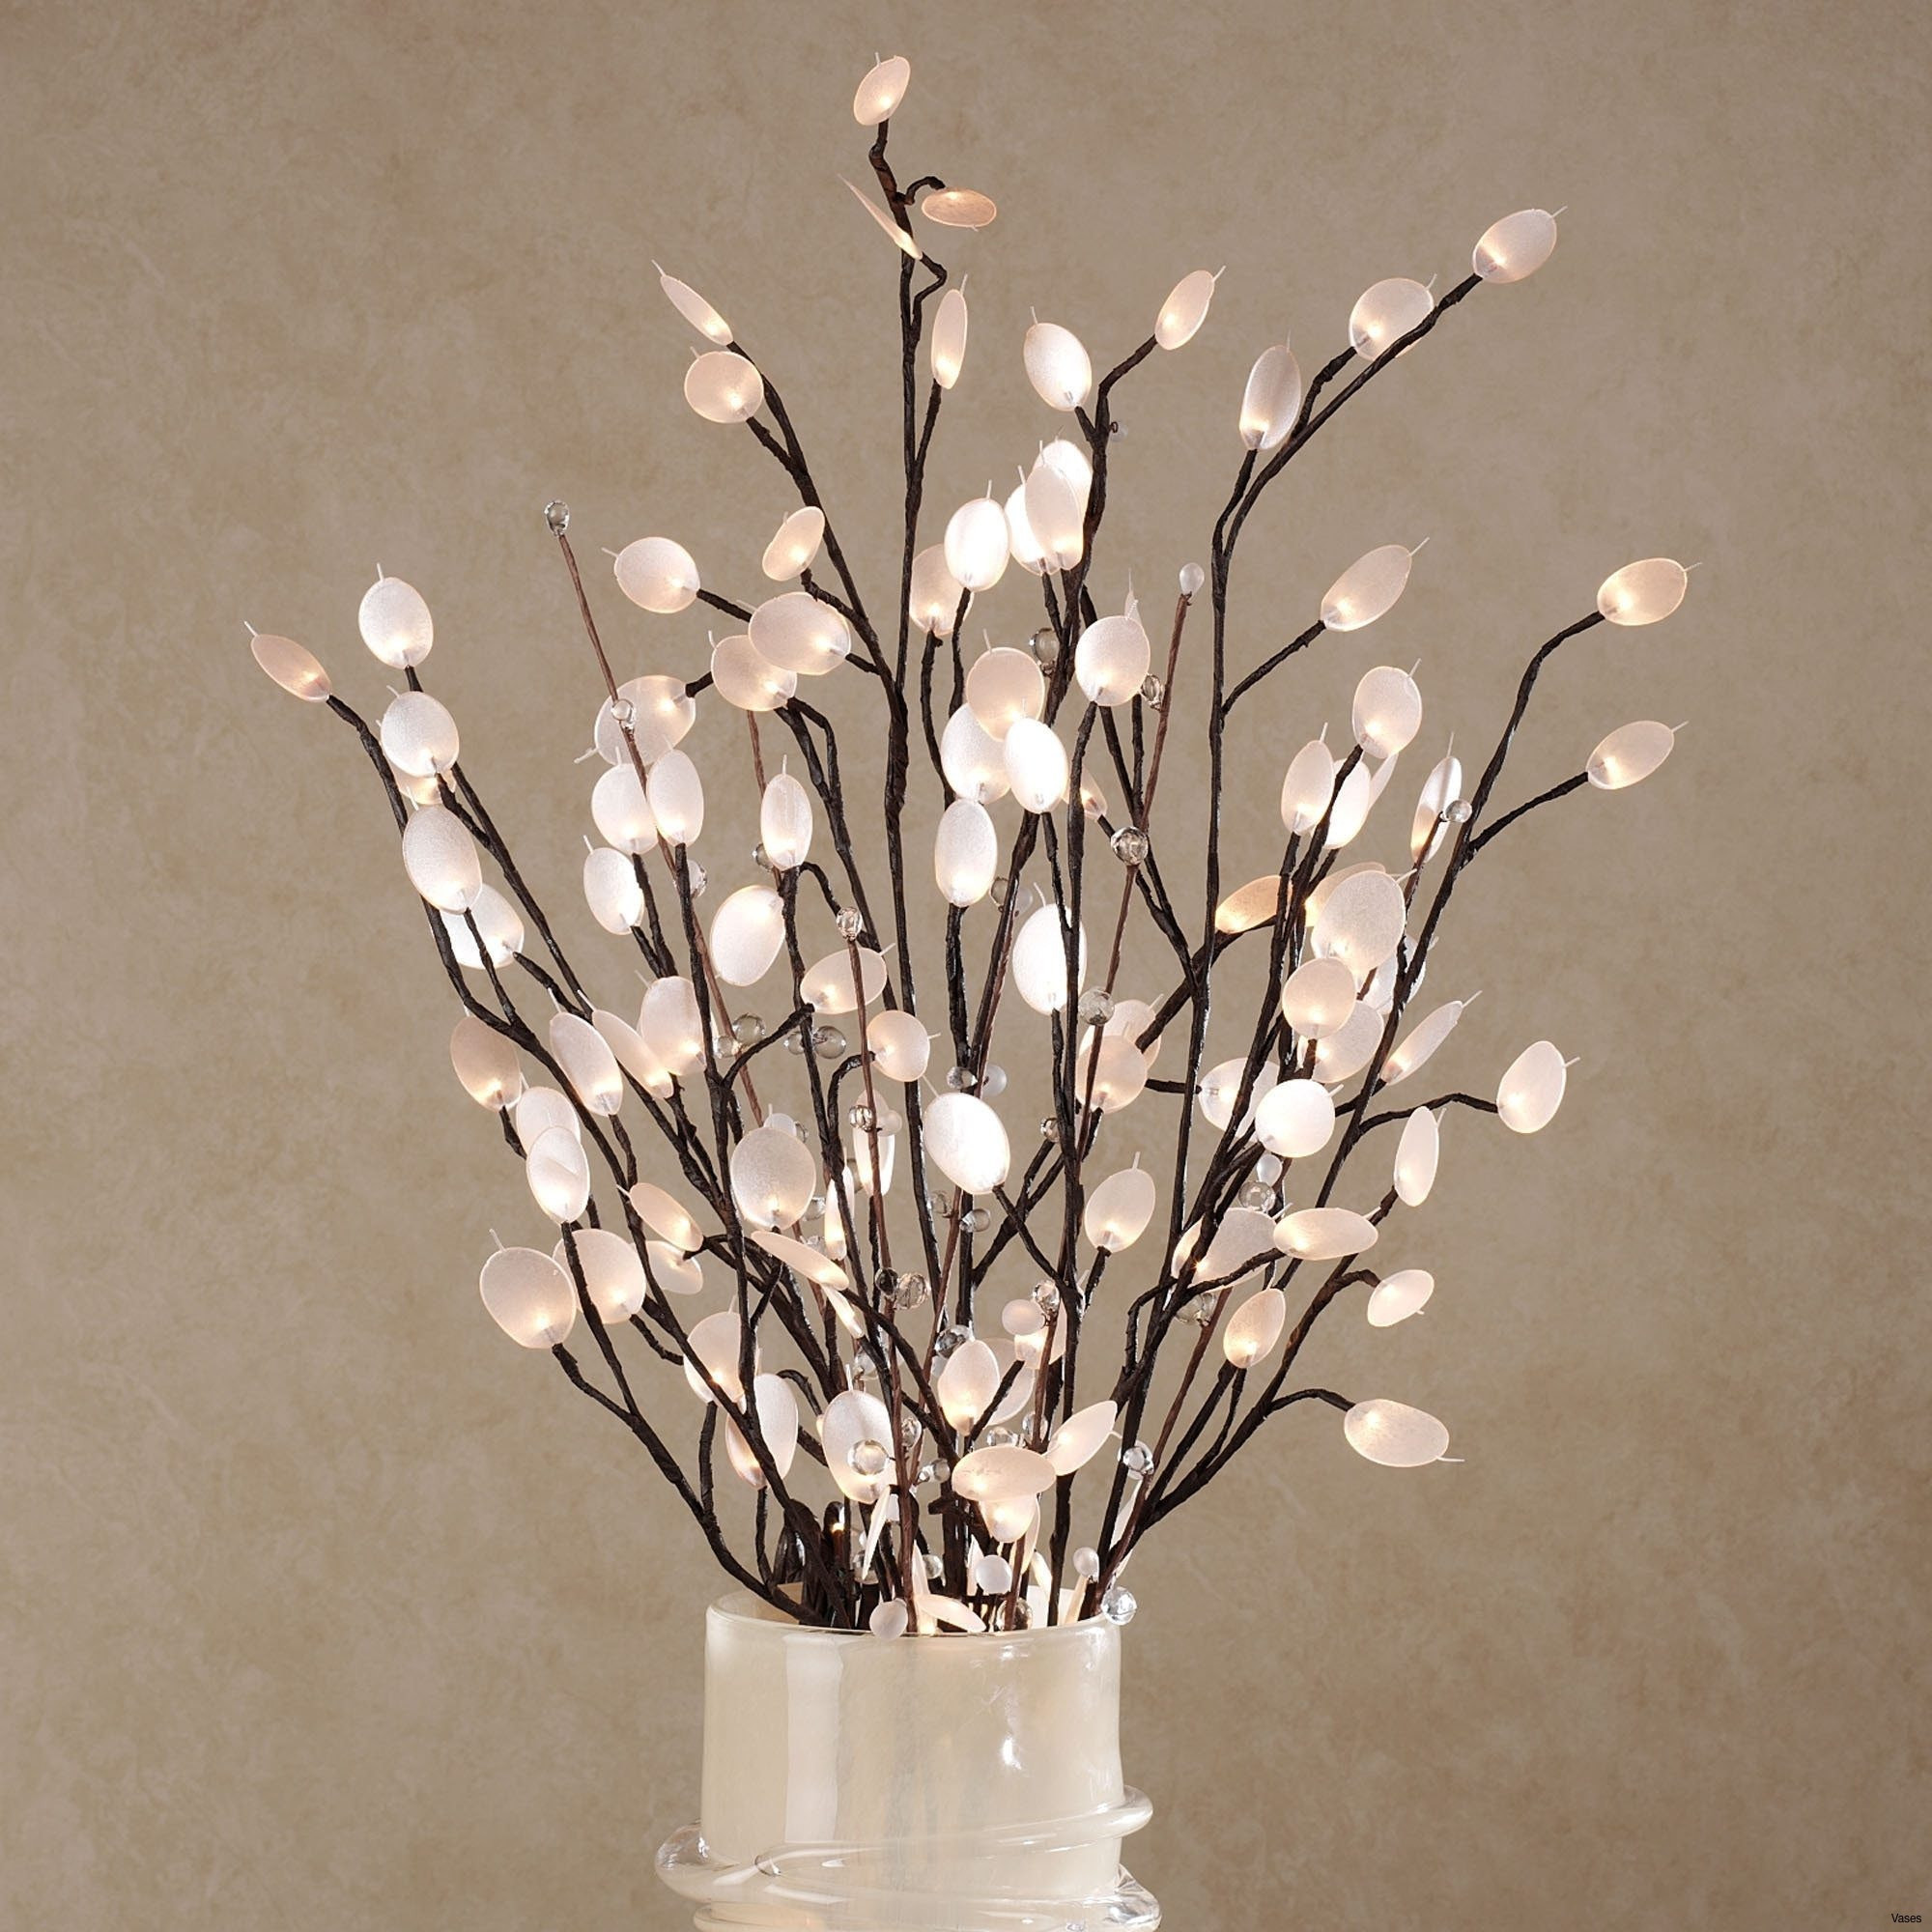 15 Spectacular Tiffany Style Vase 2024 free download tiffany style vase of vase with sticks luxury vase with sticksh vases sticks in sticksi 0d in vase with sticks luxury vase with sticksh vases sticks in sticksi 0d lights bamboo design